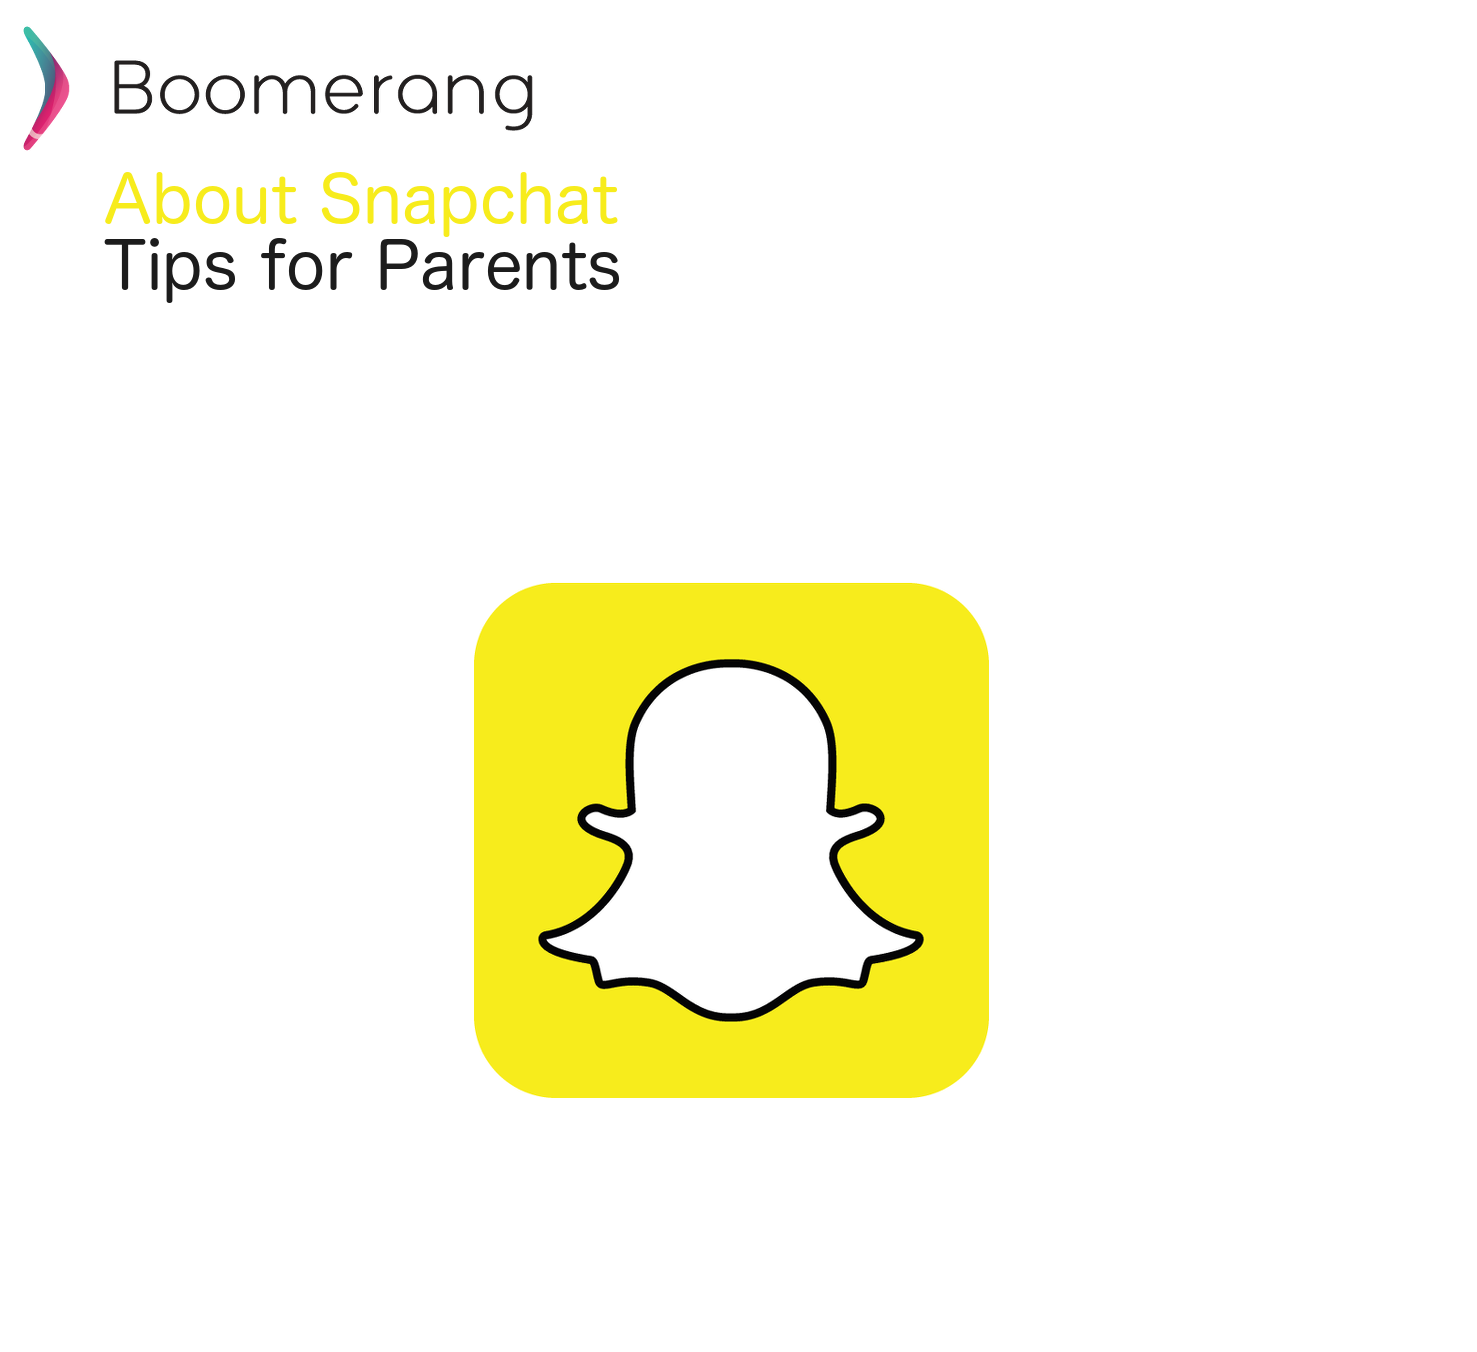 About Snapchat - Gotchas and Tips for Parents